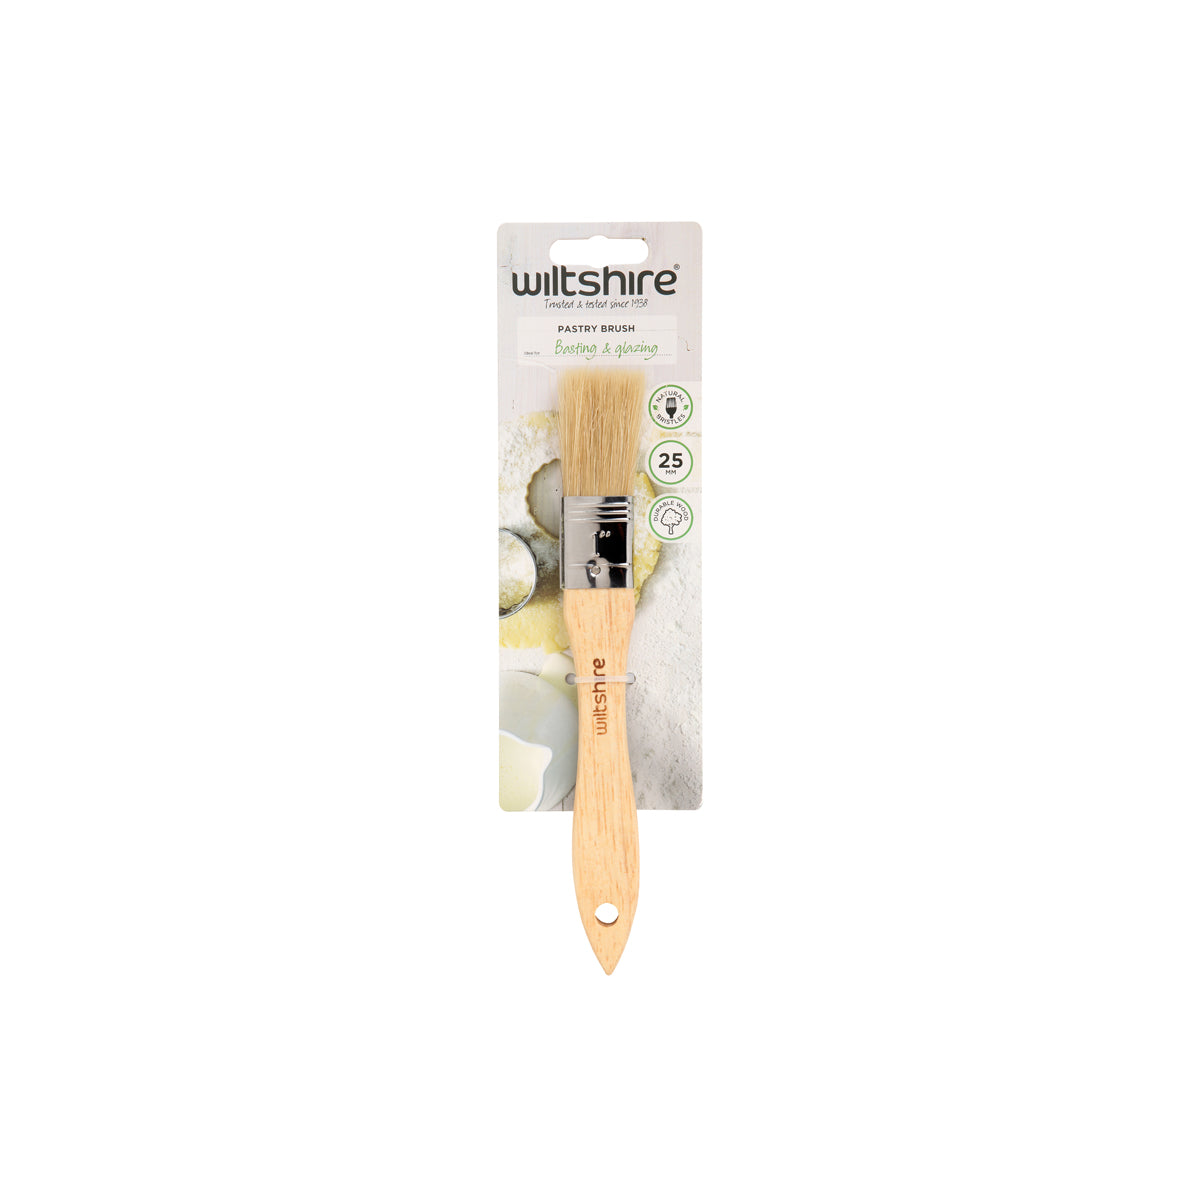 WLT43179 Wiltshire Pastry Brush Natural Bristle 25mm Tomkin Australia Hospitality Supplies